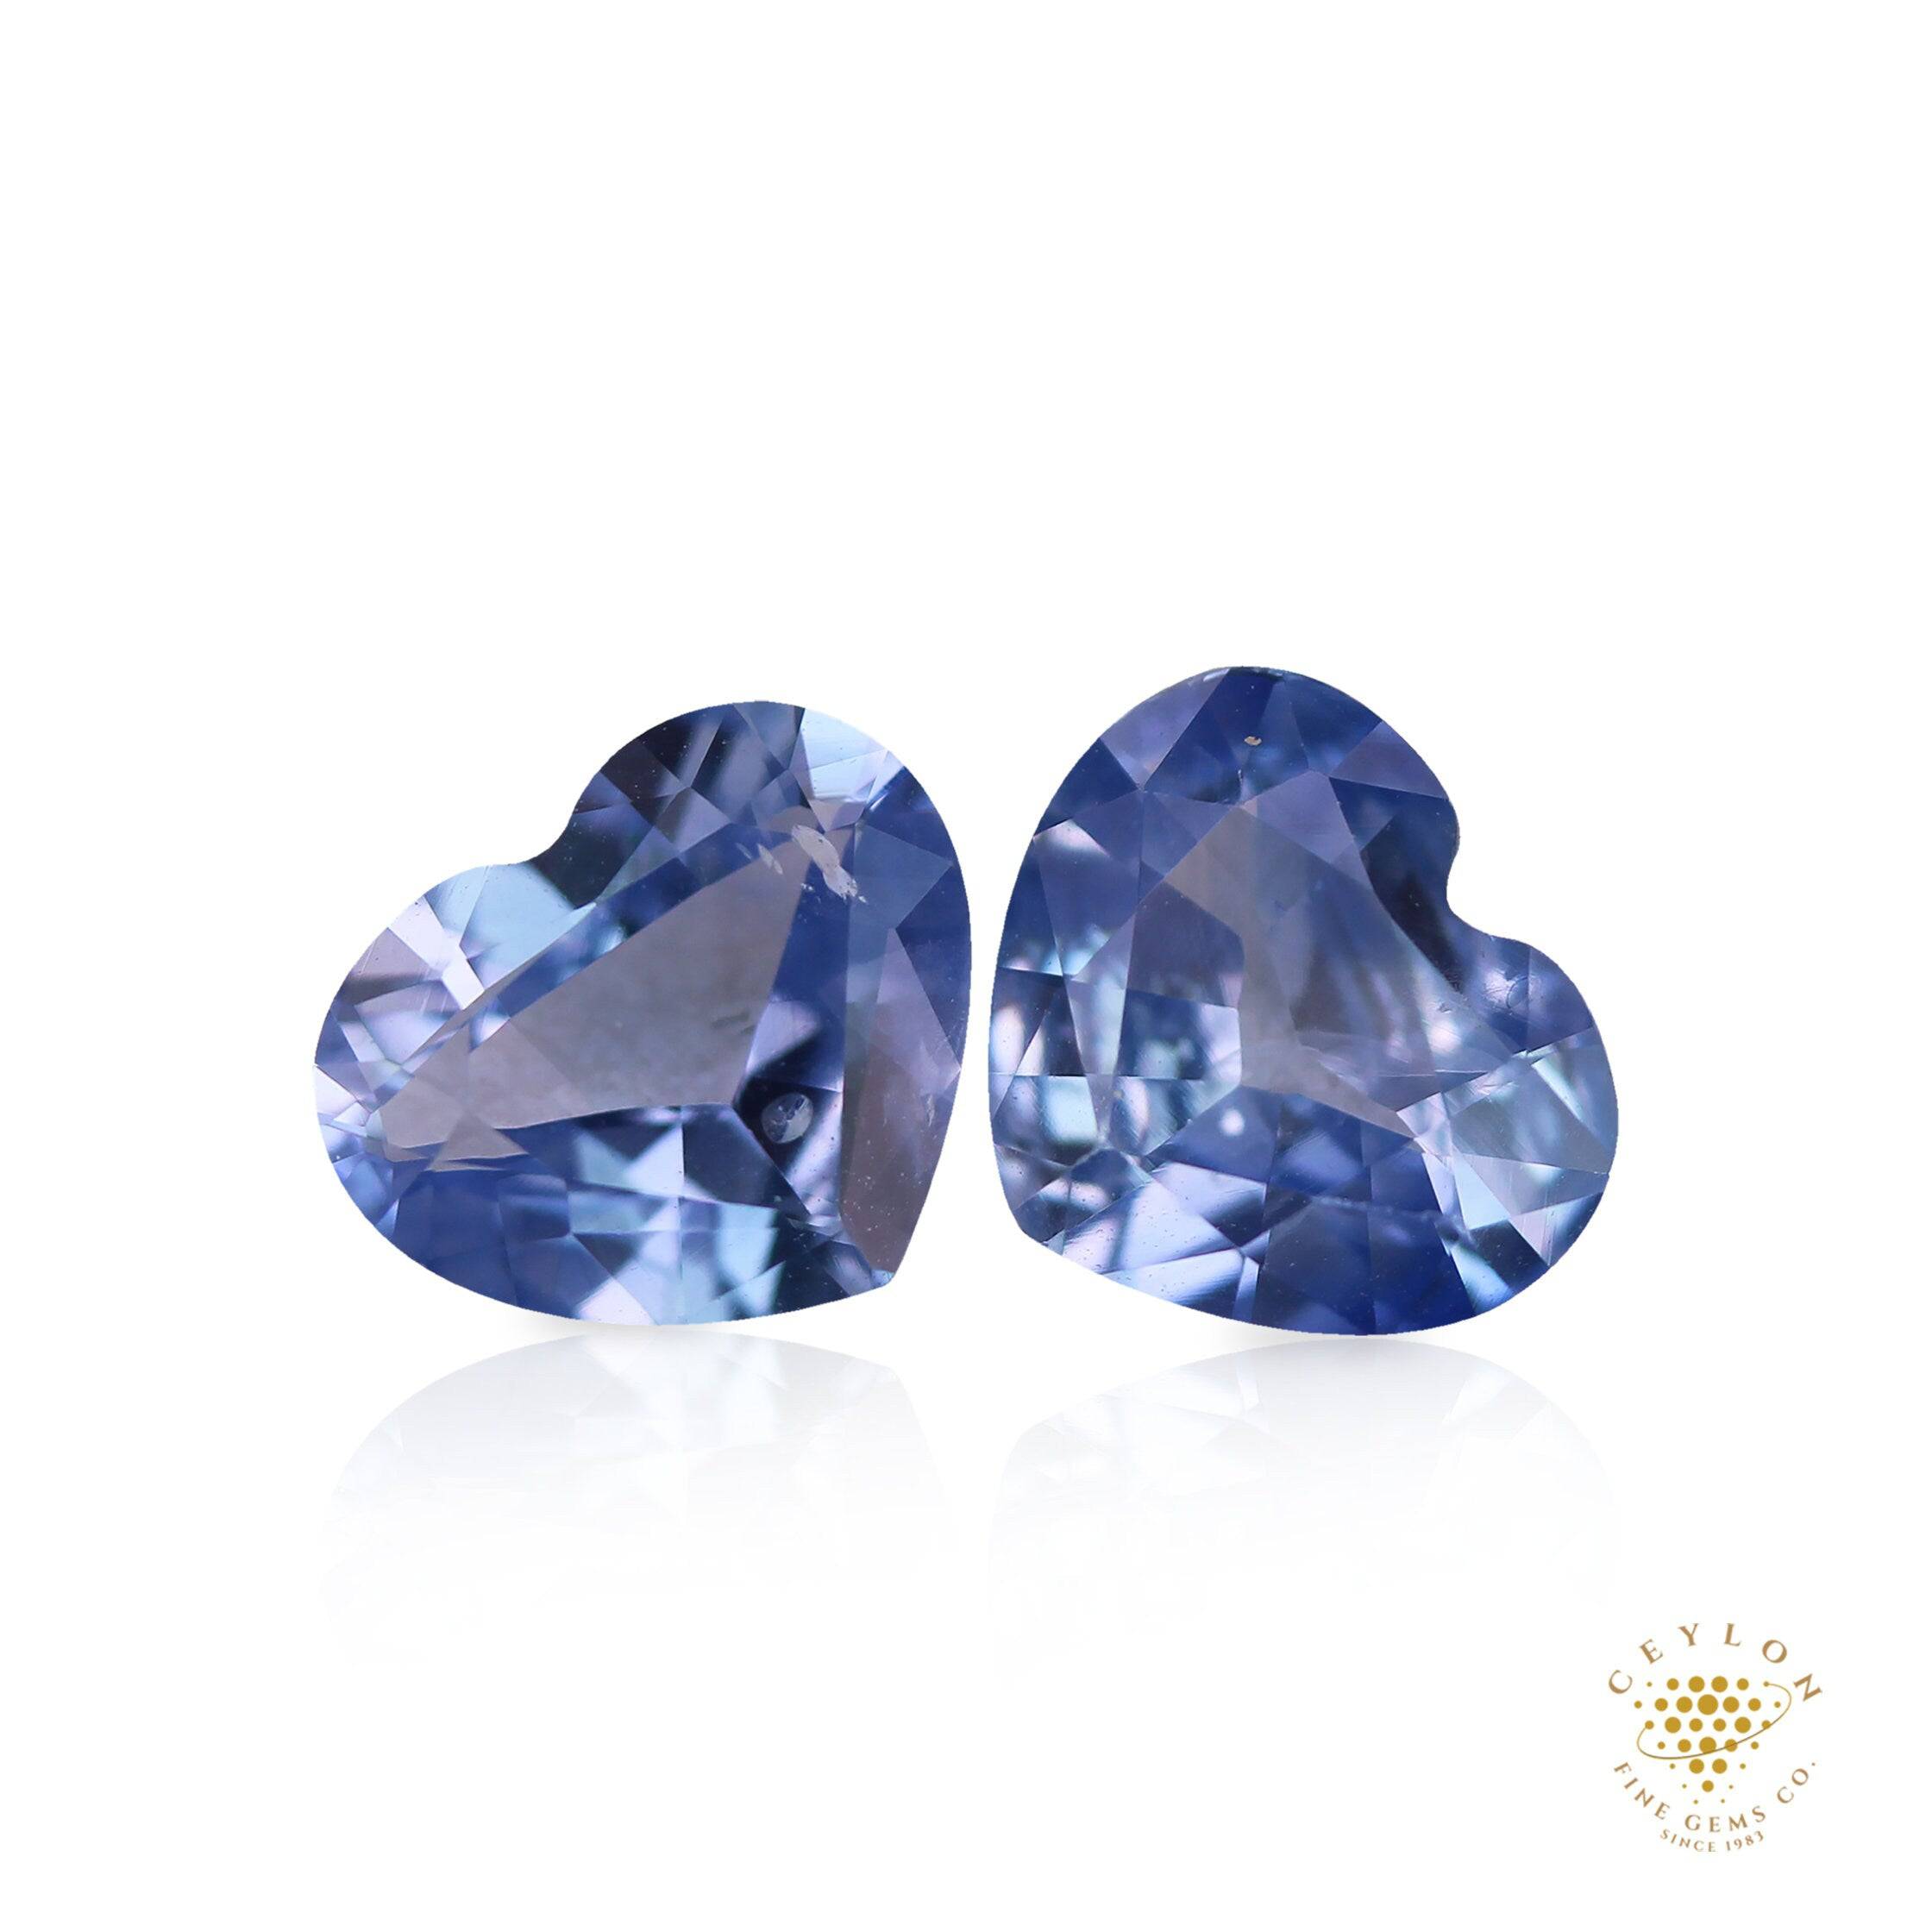 1.32 Cts & 1.25 Cts Natural Blue Sapphire Pair - (H) - Baza Boutique 